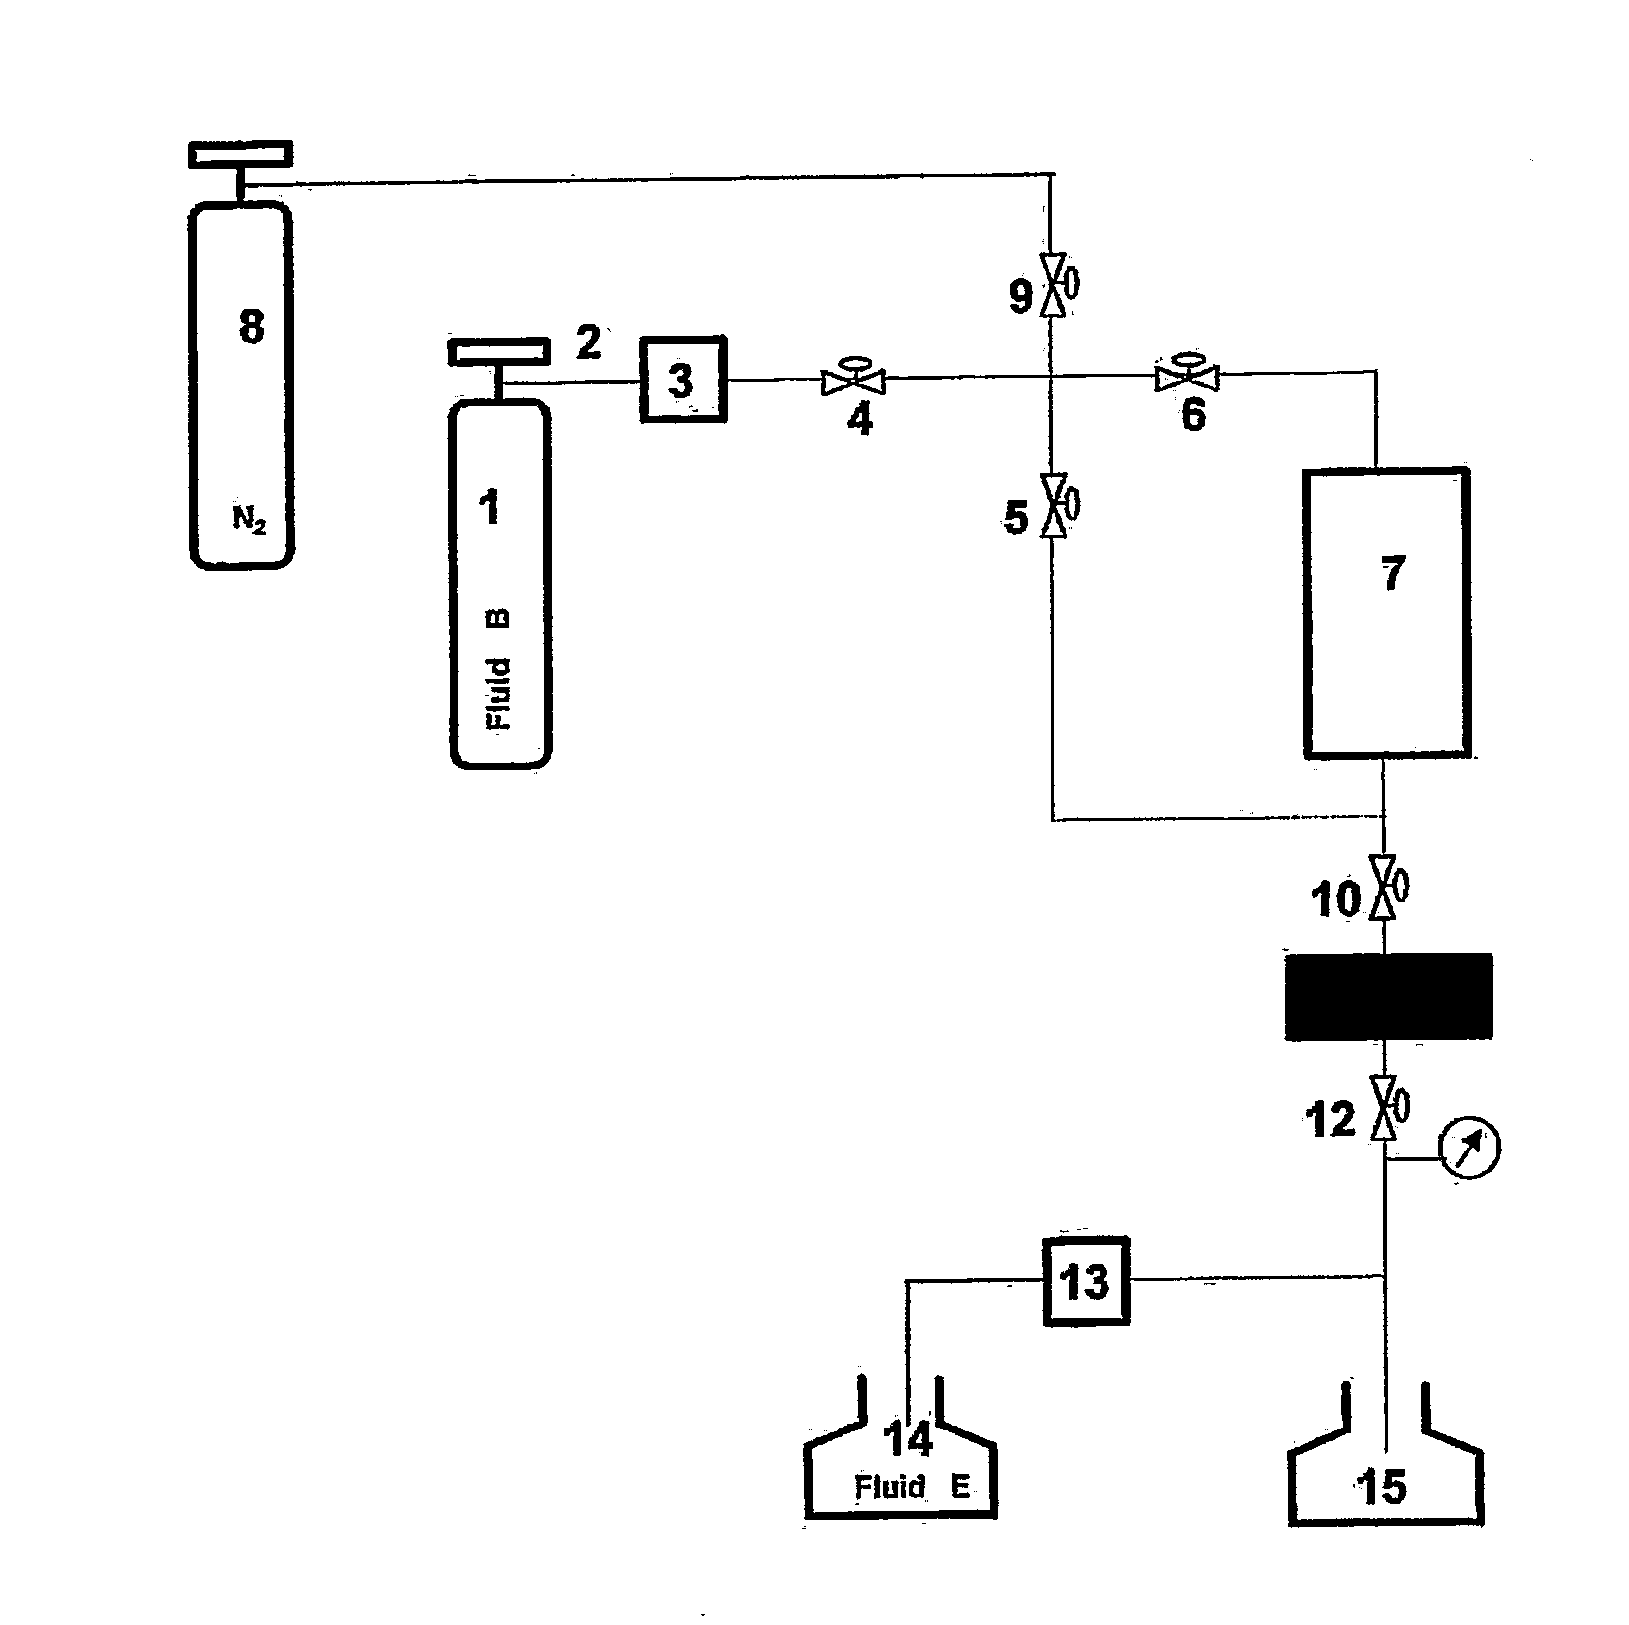 Method For Obtaining Micro- And Nano- Disperse Systems